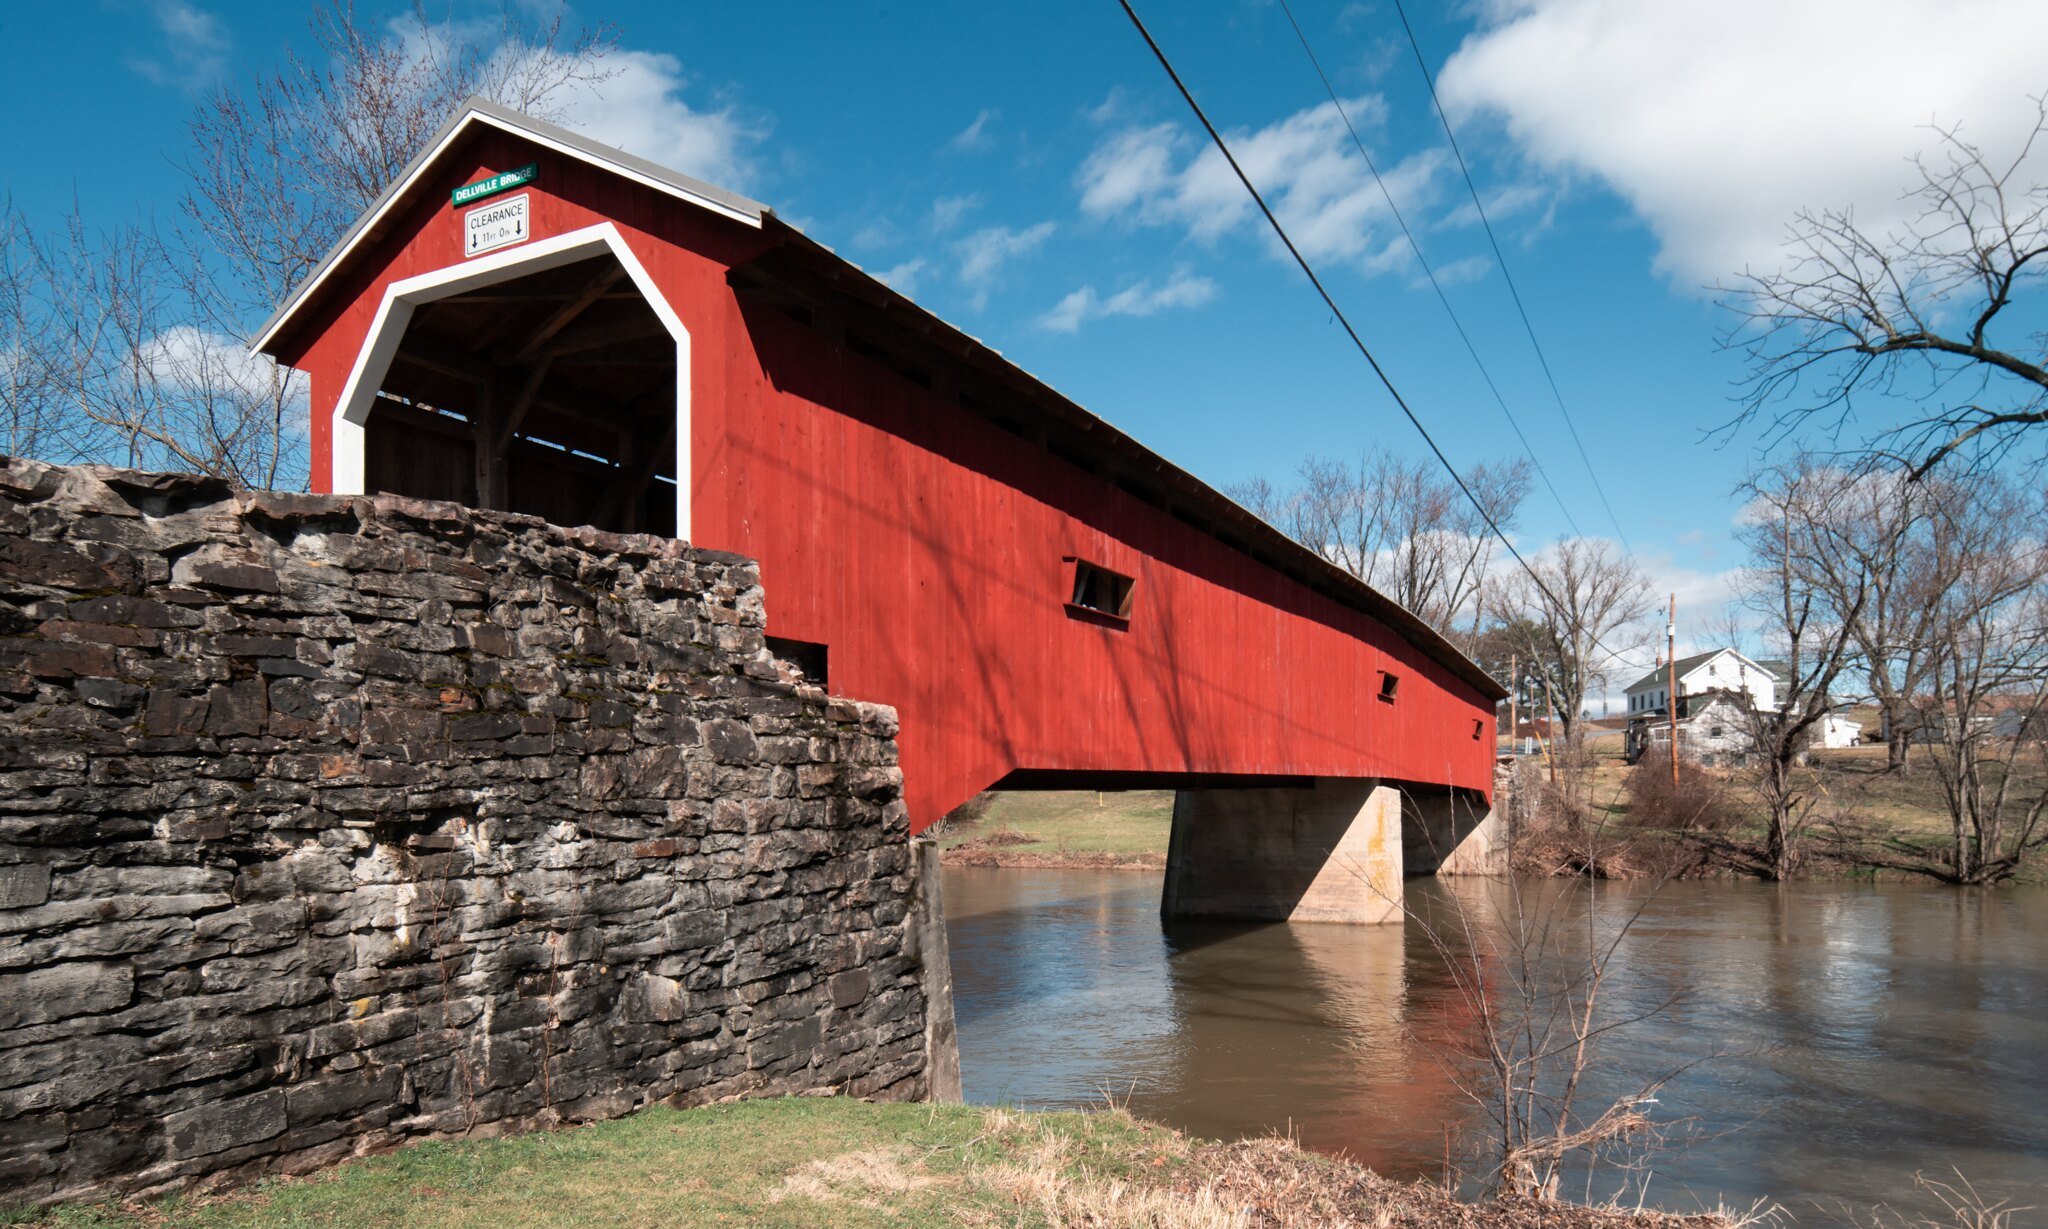  Dellville Covered Bridge in Wheatfield Township, Perry County, PA.  Rebuilt in 2019 after arson destroyed it in 2014. 